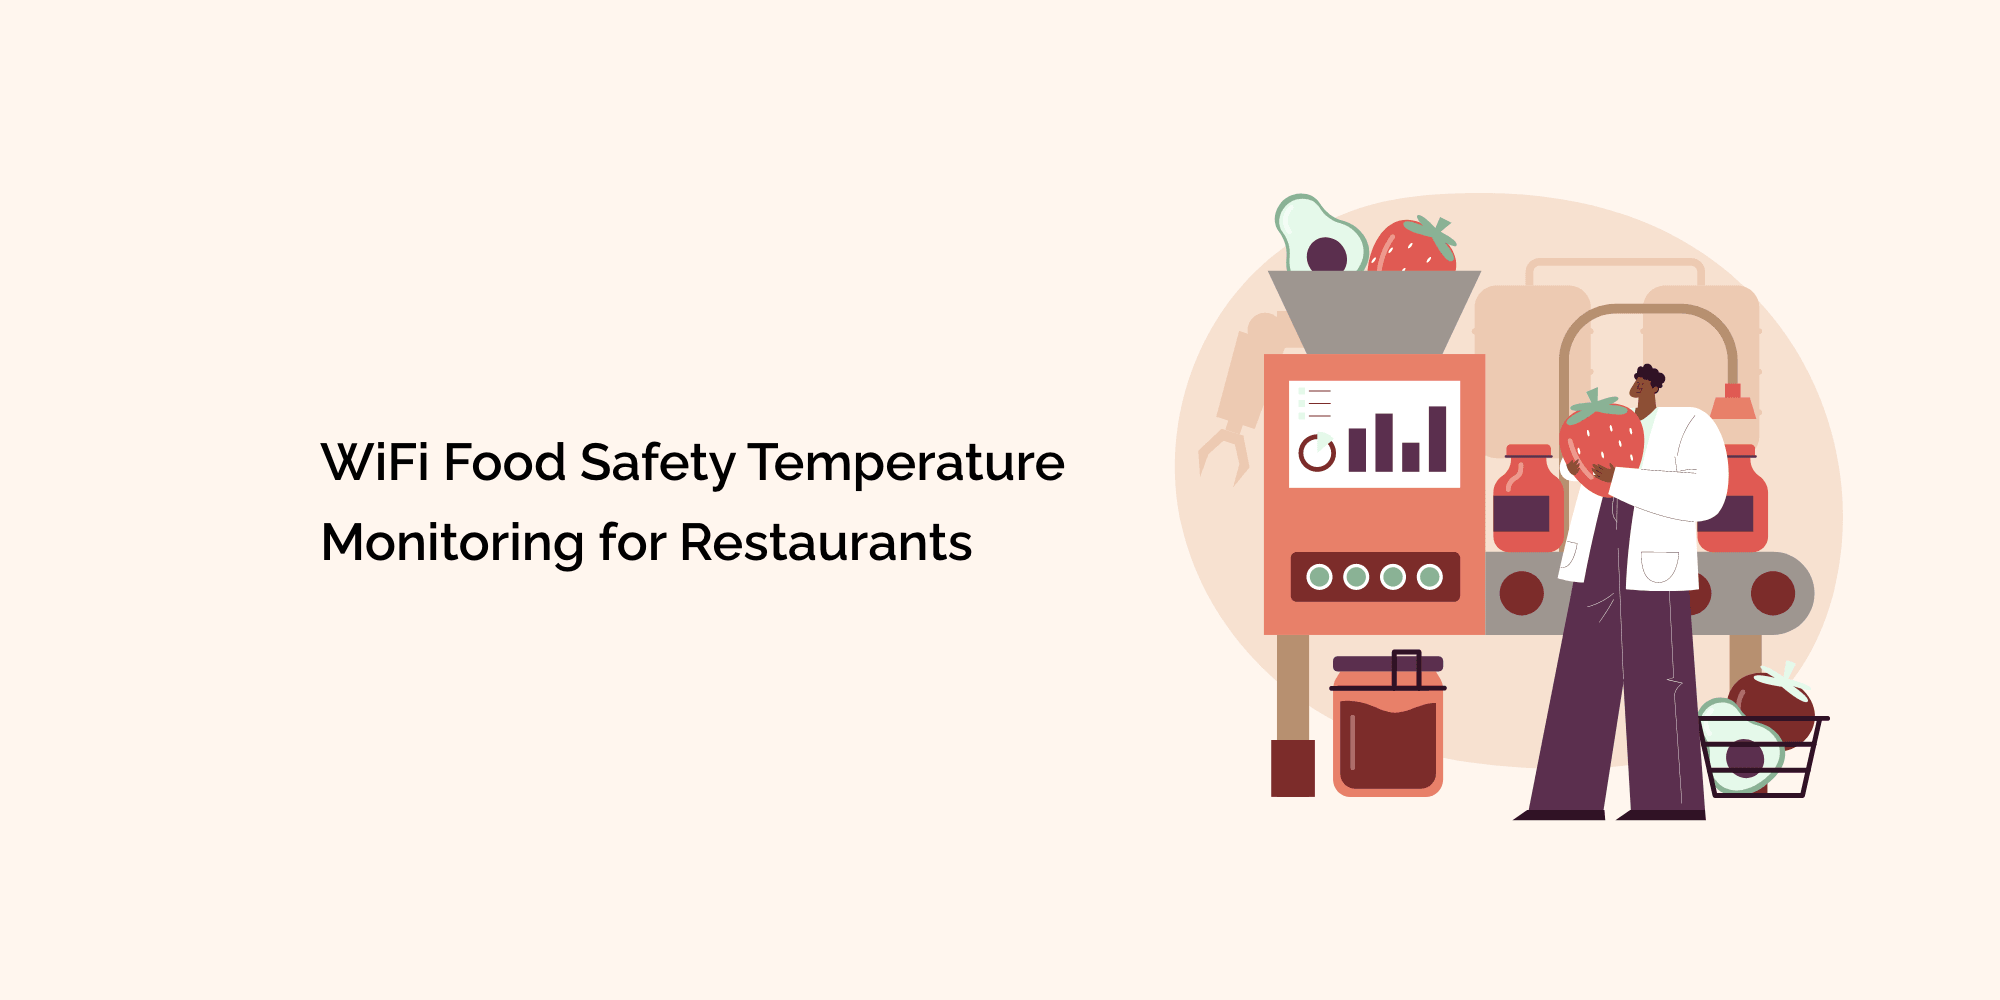 WiFi Food Safety Temperature Monitoring for Restaurants